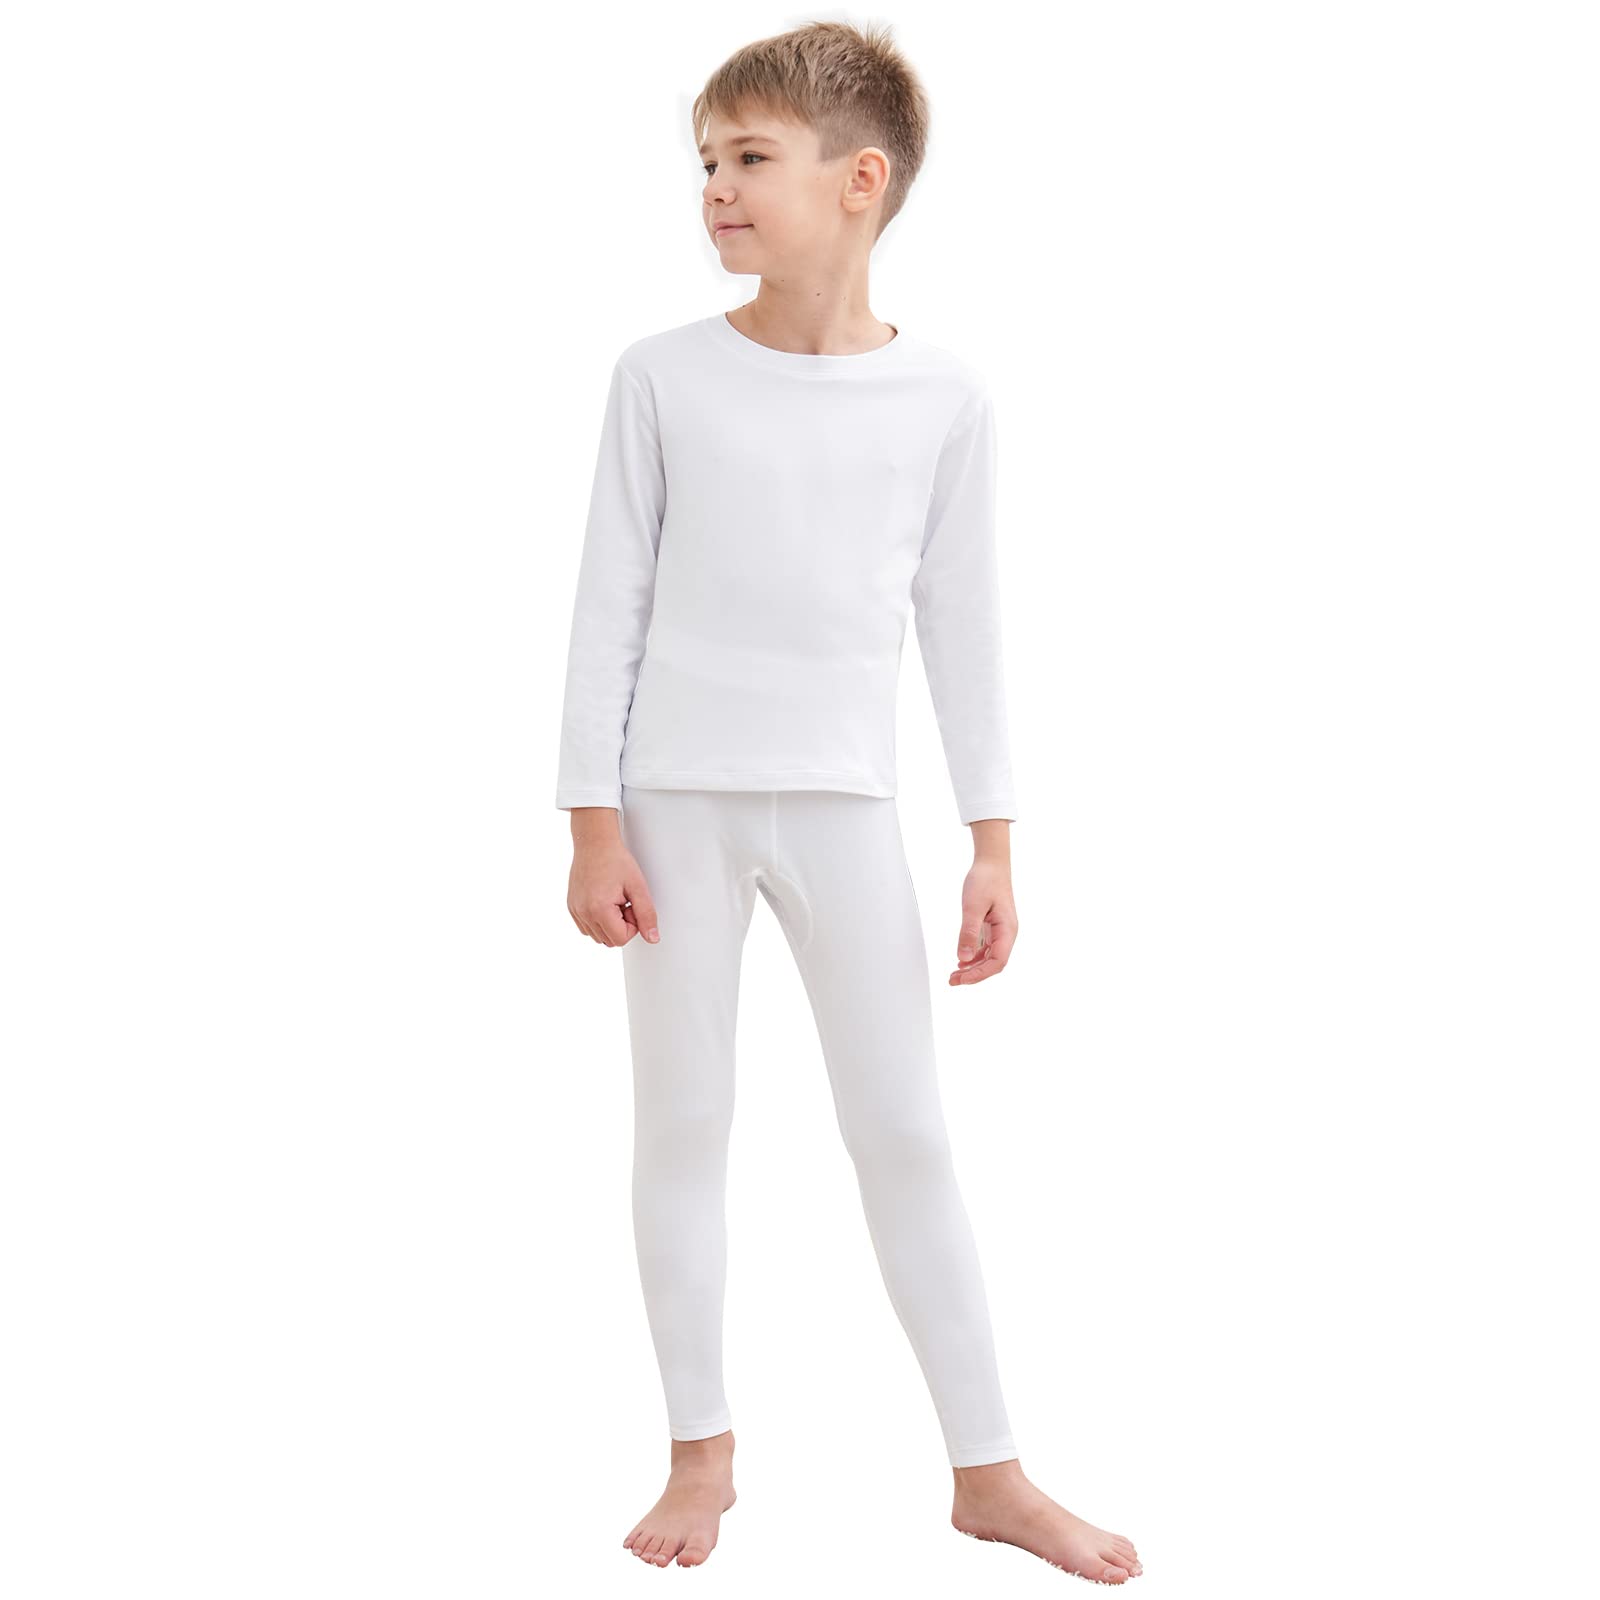 Buy HEROBIKER Thermal Underwear Boys Ultra Soft Fleece Lined Kids Thermals Long  Johns Top Bottom Warm Set for Winter Skiing